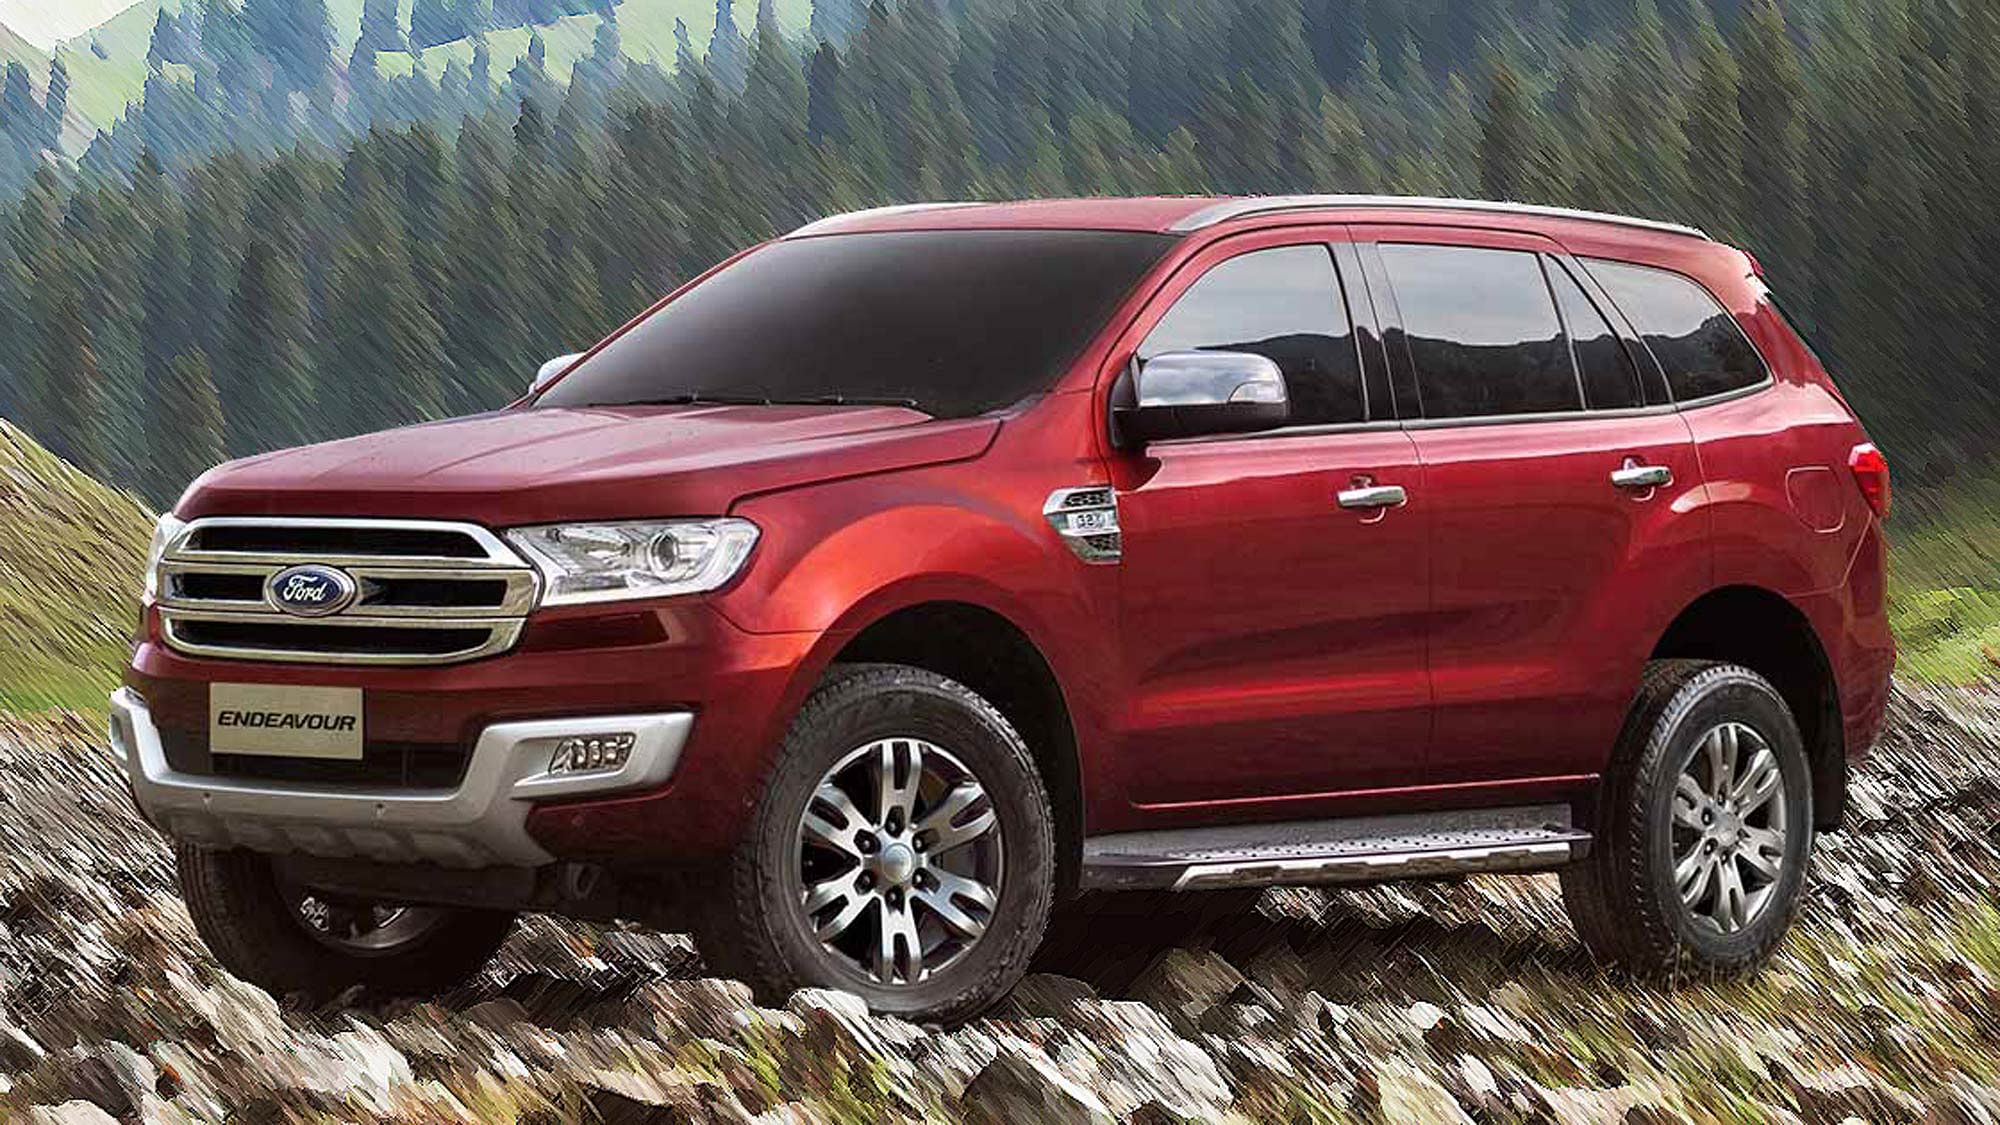 Here’s All You Need to Know About the New Ford Endeavour